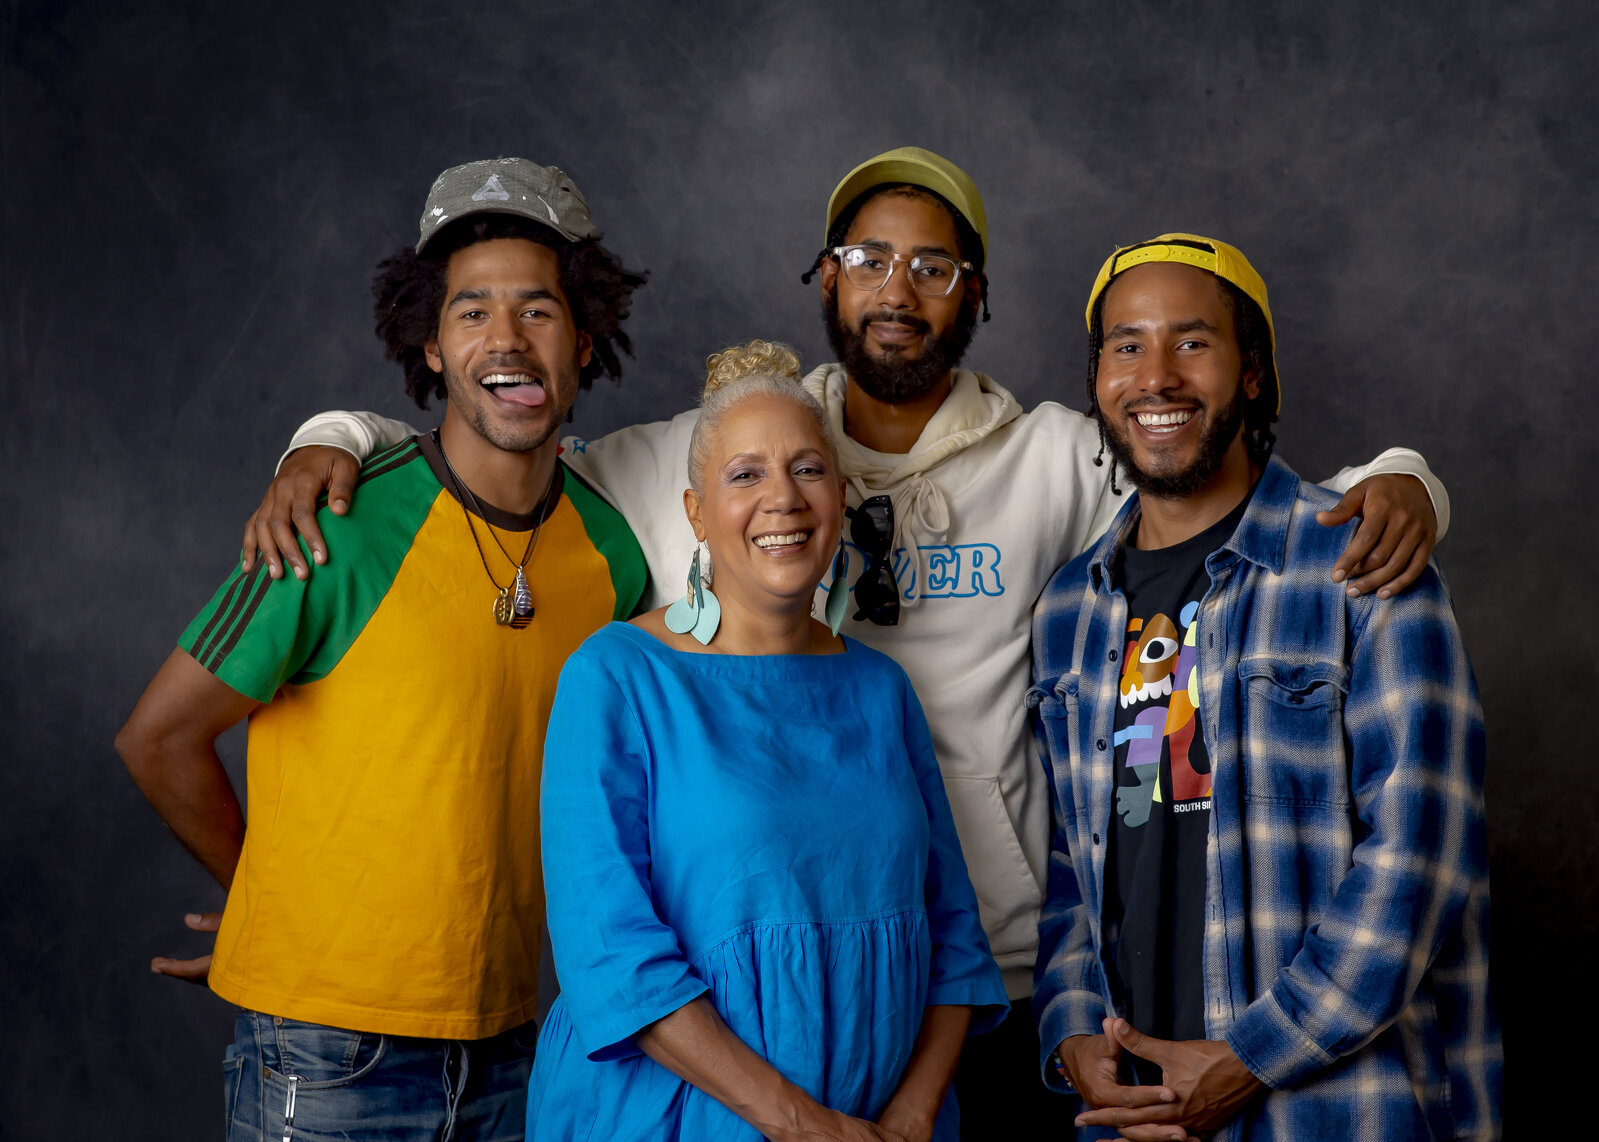 A group portrait of a woman surrounded by three younger men against a gray backdrop.